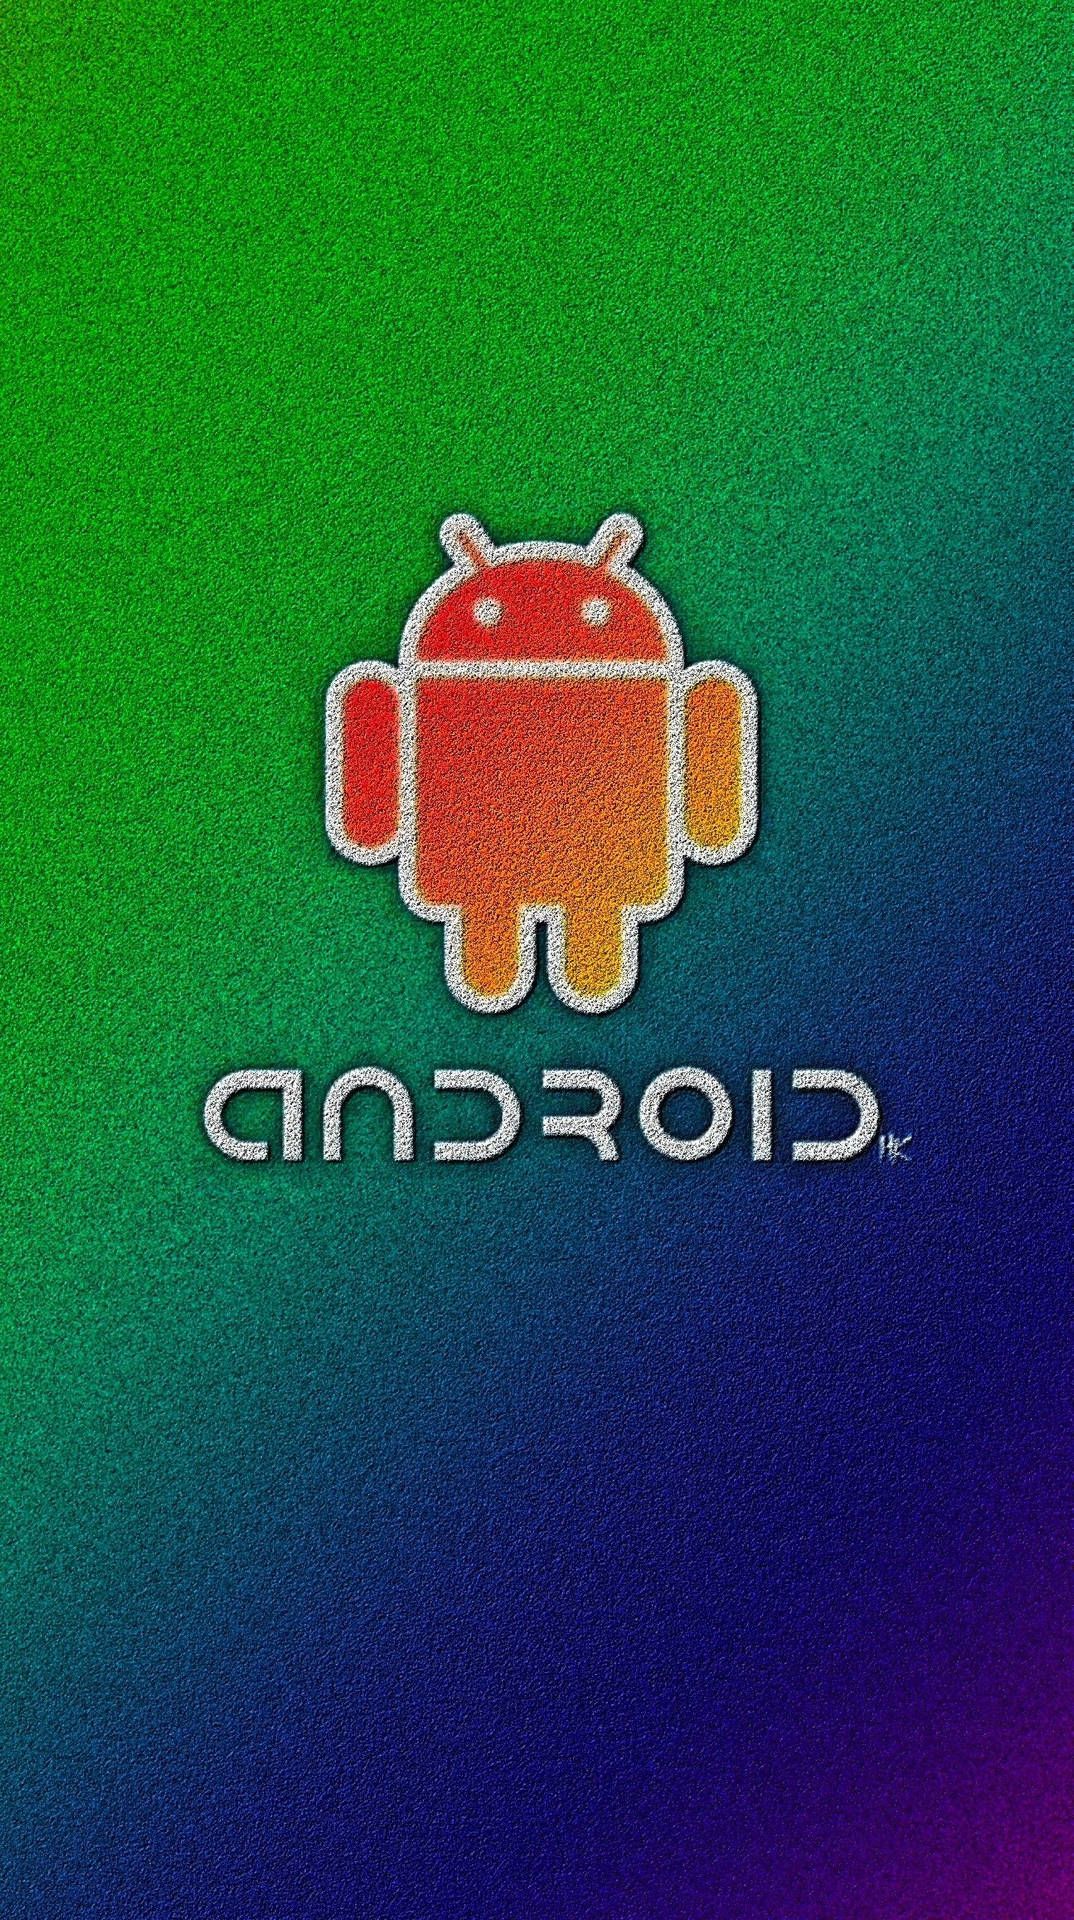 Android wallpaper for mobile phone - Android